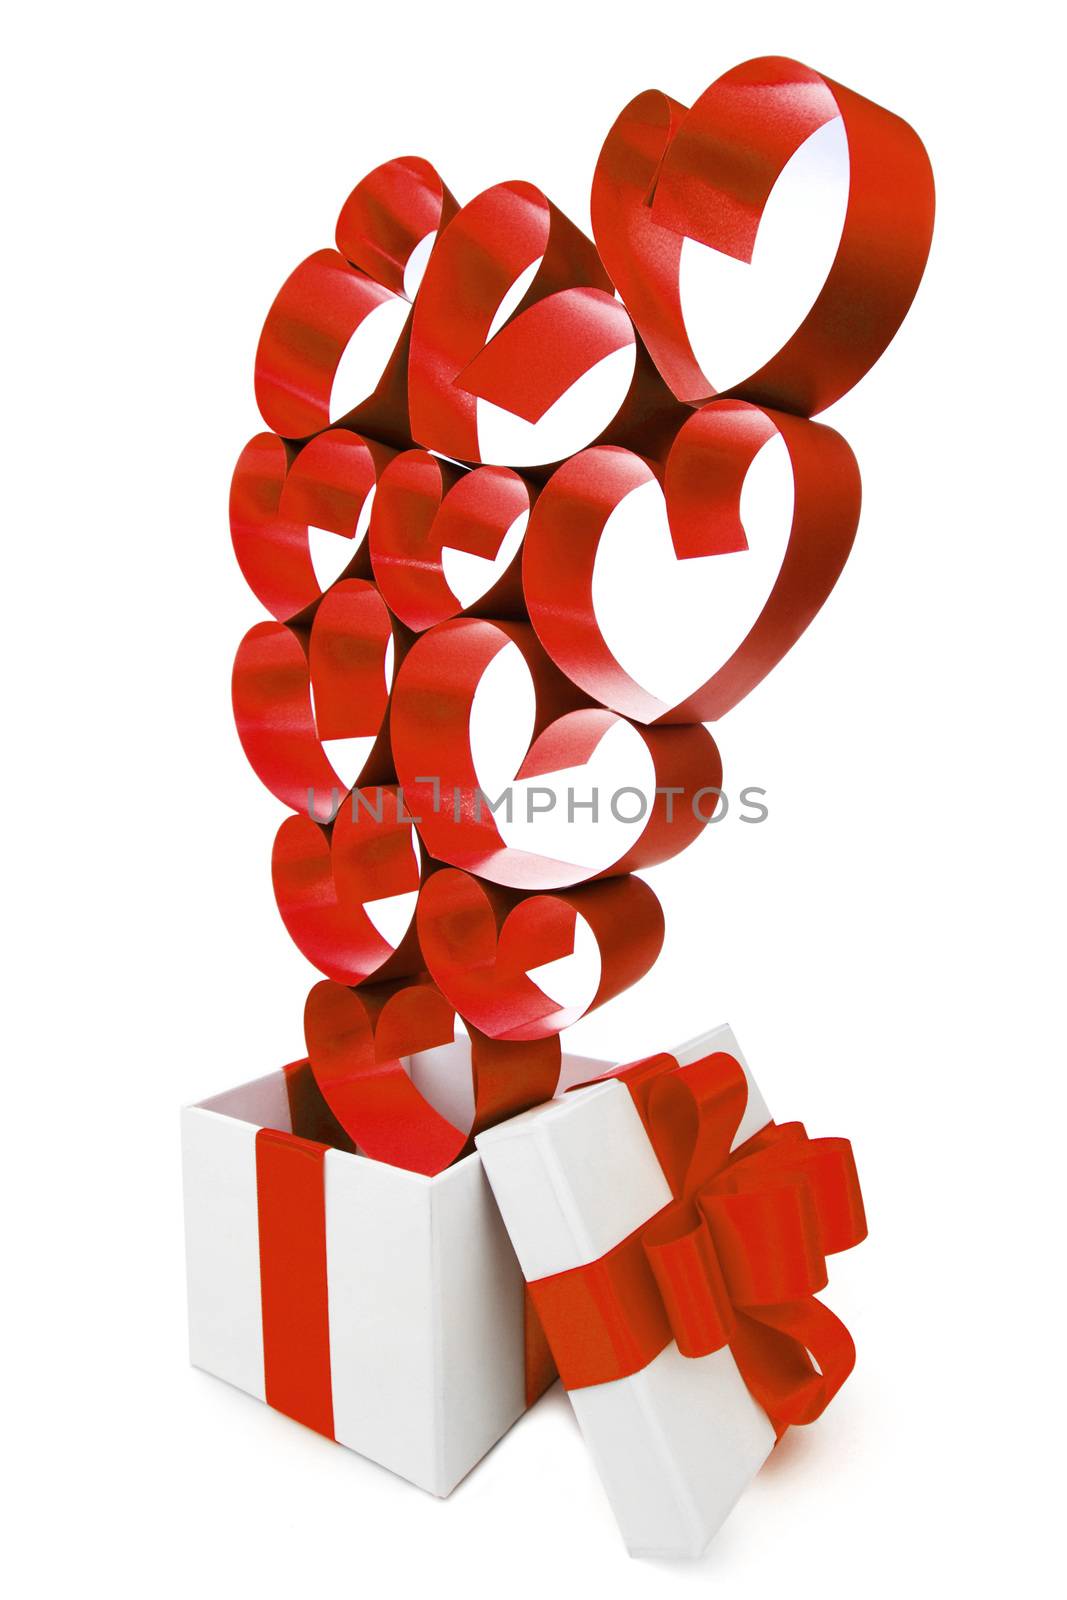 Gift in white box with pink ribbons and hearts isolated on white background